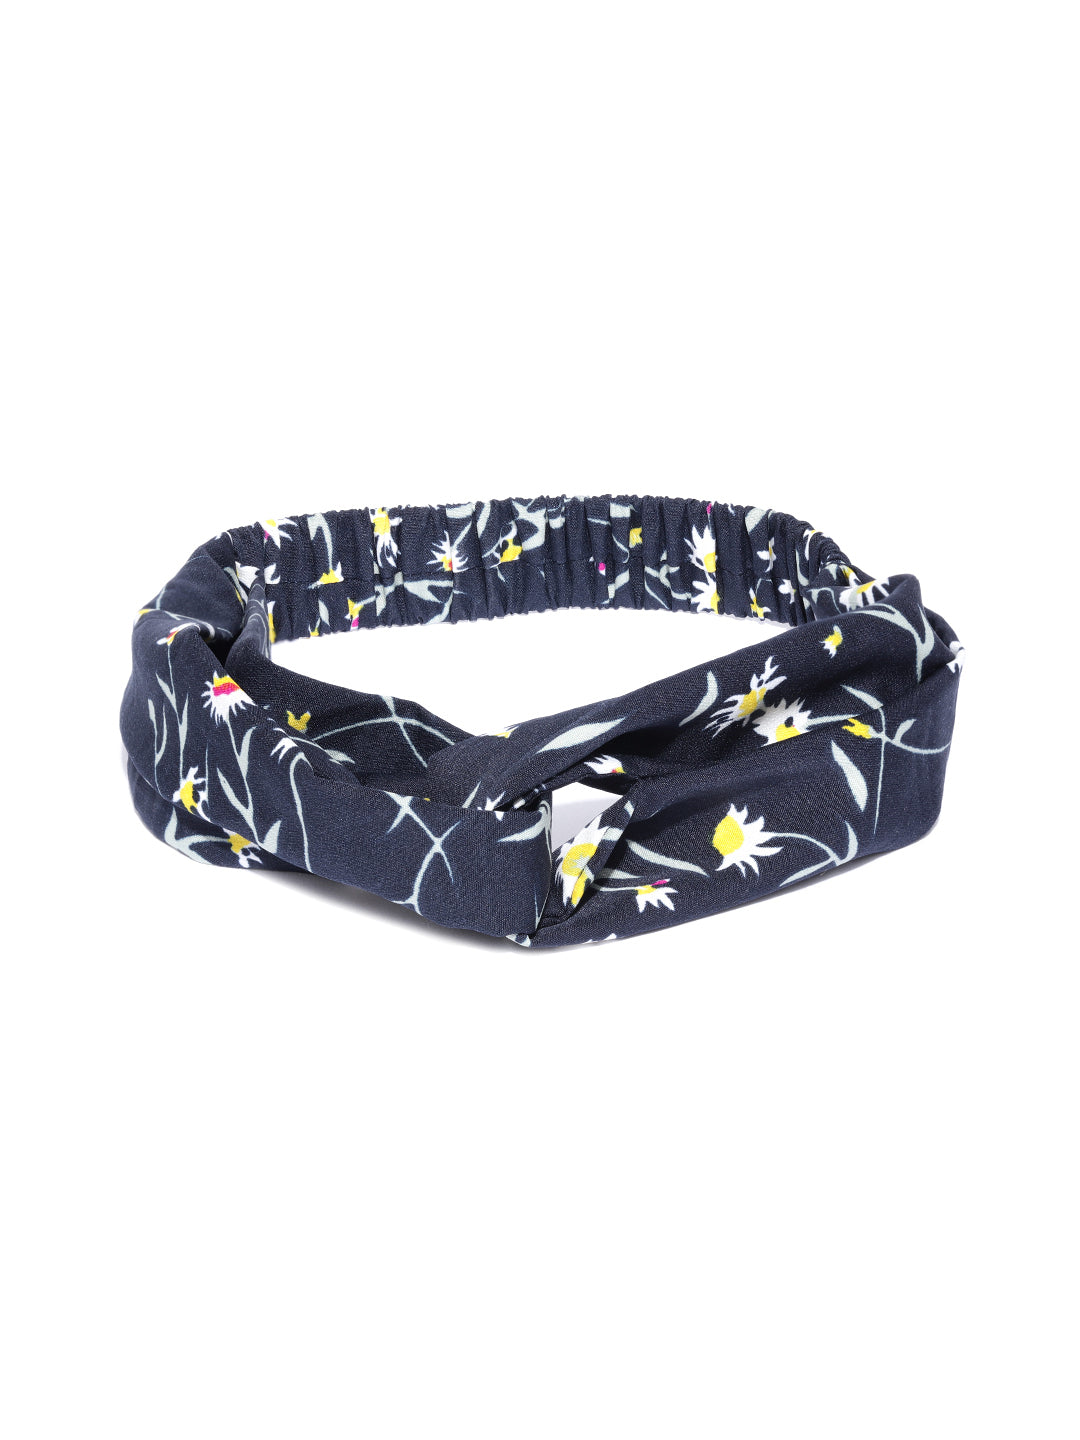 Blueberry floral print knot navy blue hairband